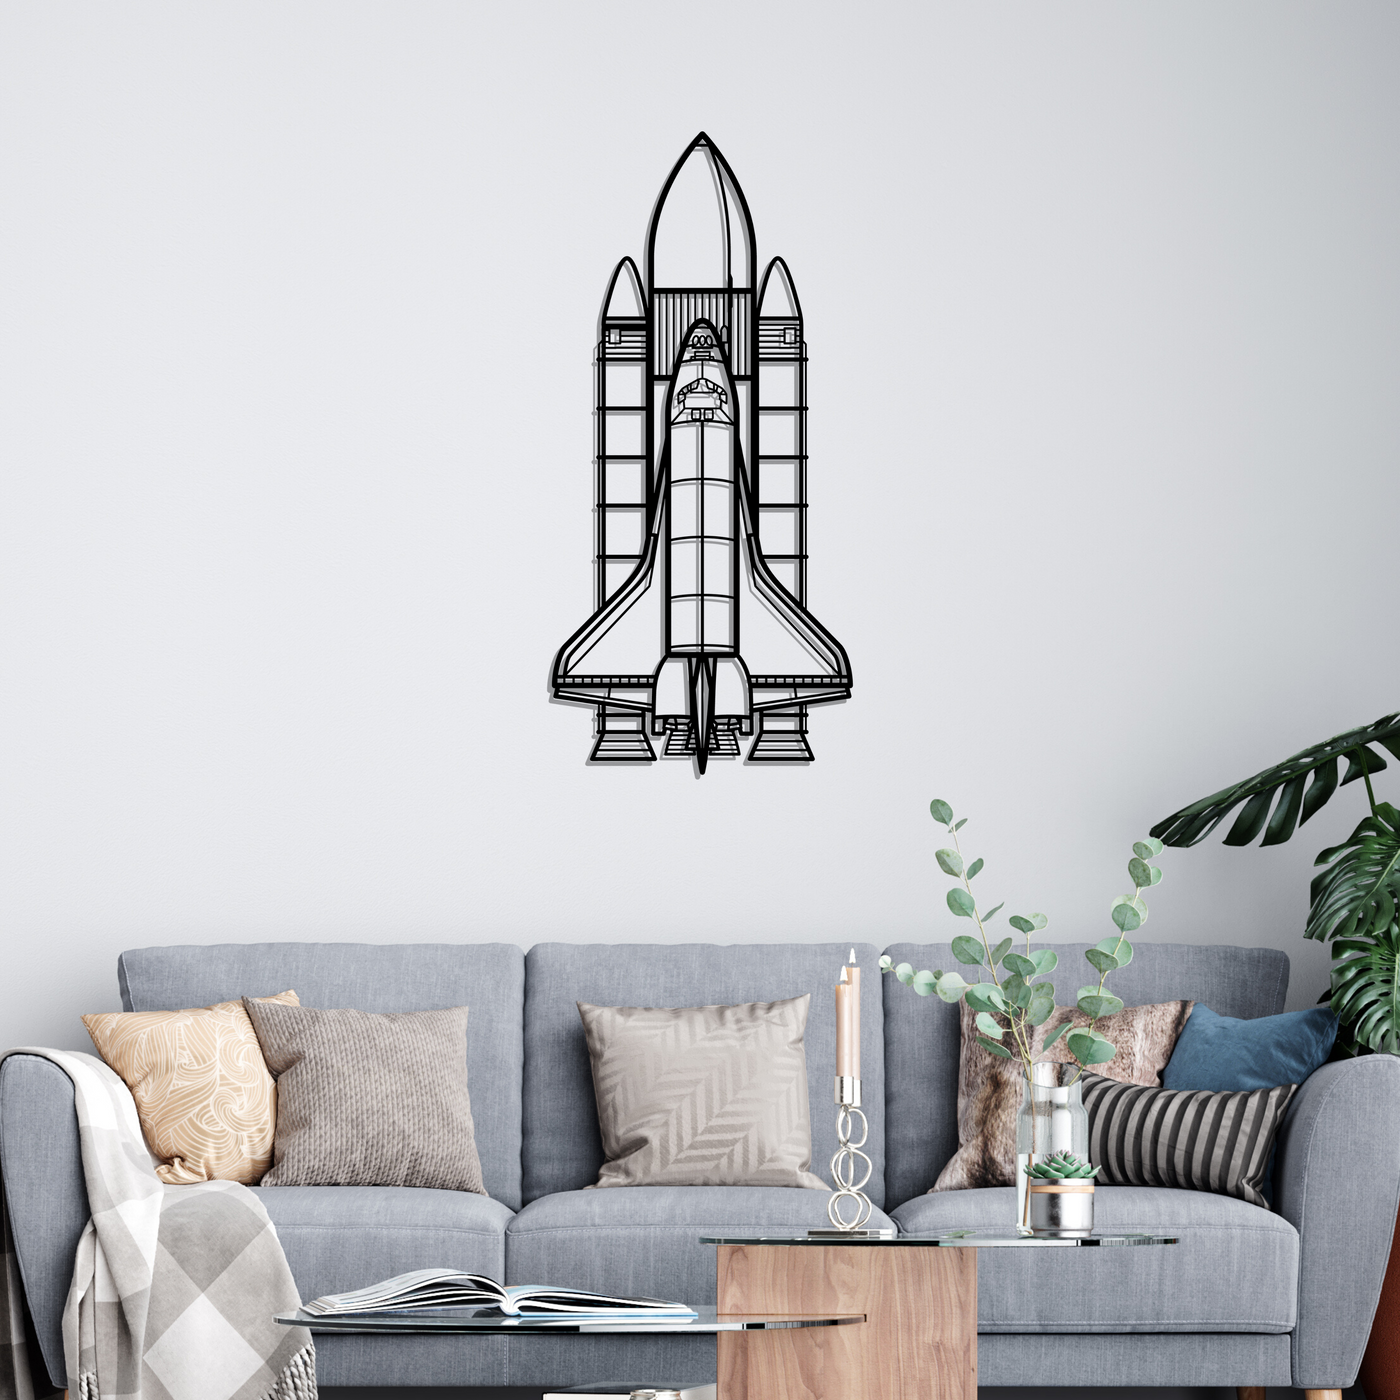 Space System Silhouette Metal Wall Art